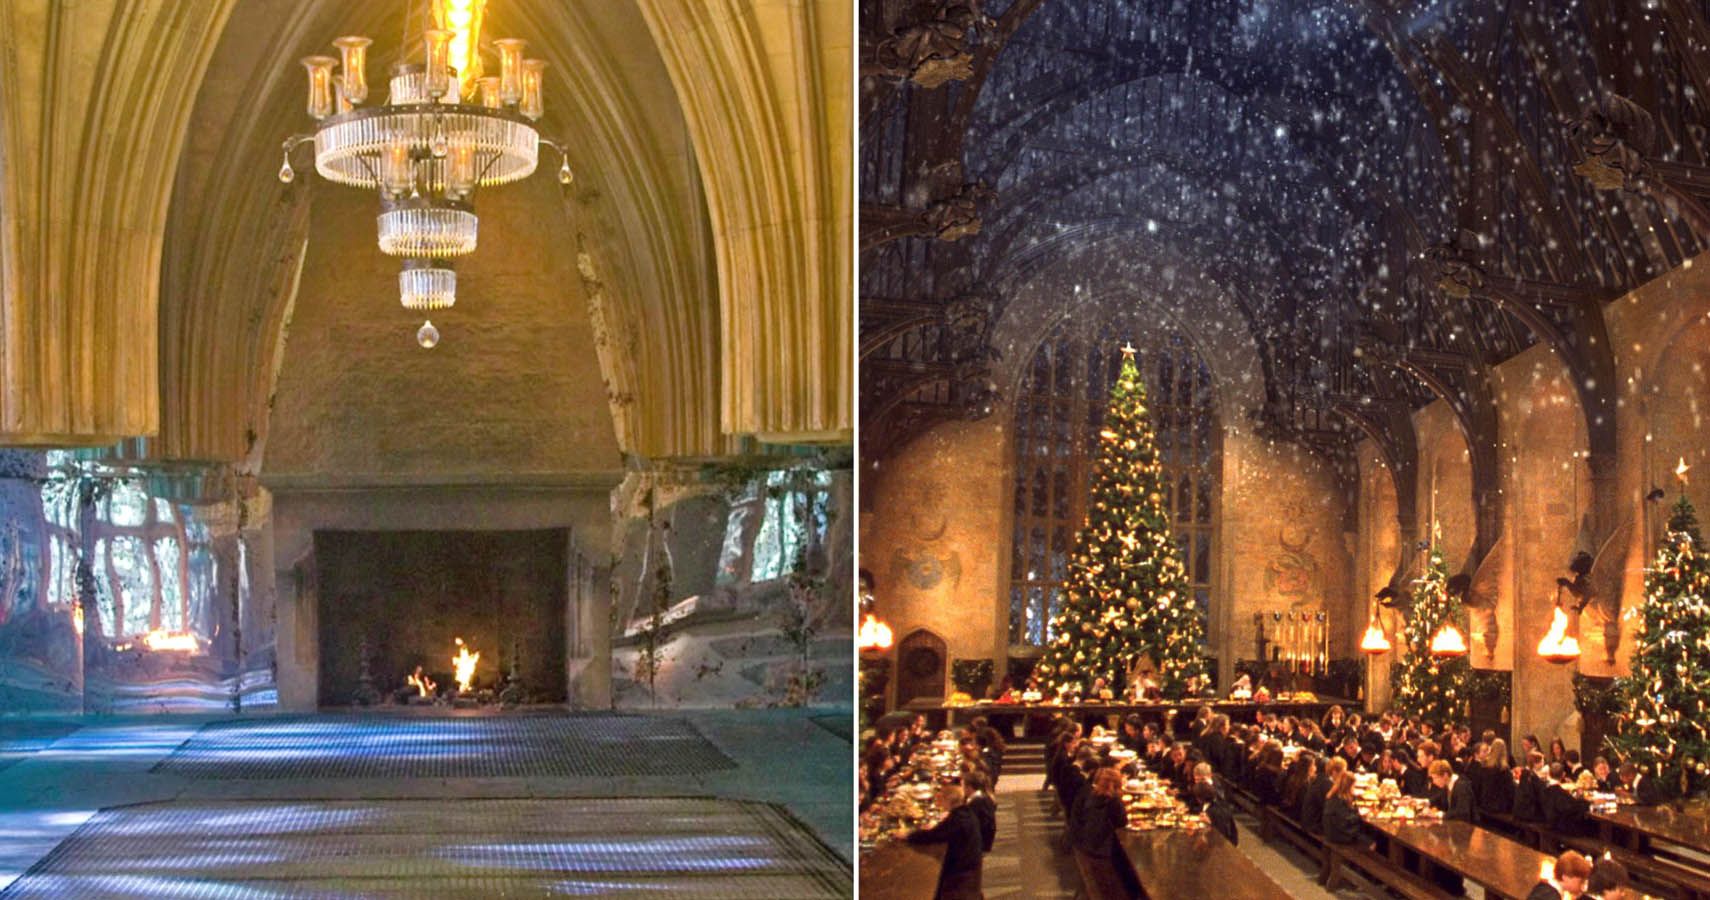 Harry Potter 5 Locations The Movies Did Justice (& 5 That Missed The Mark)